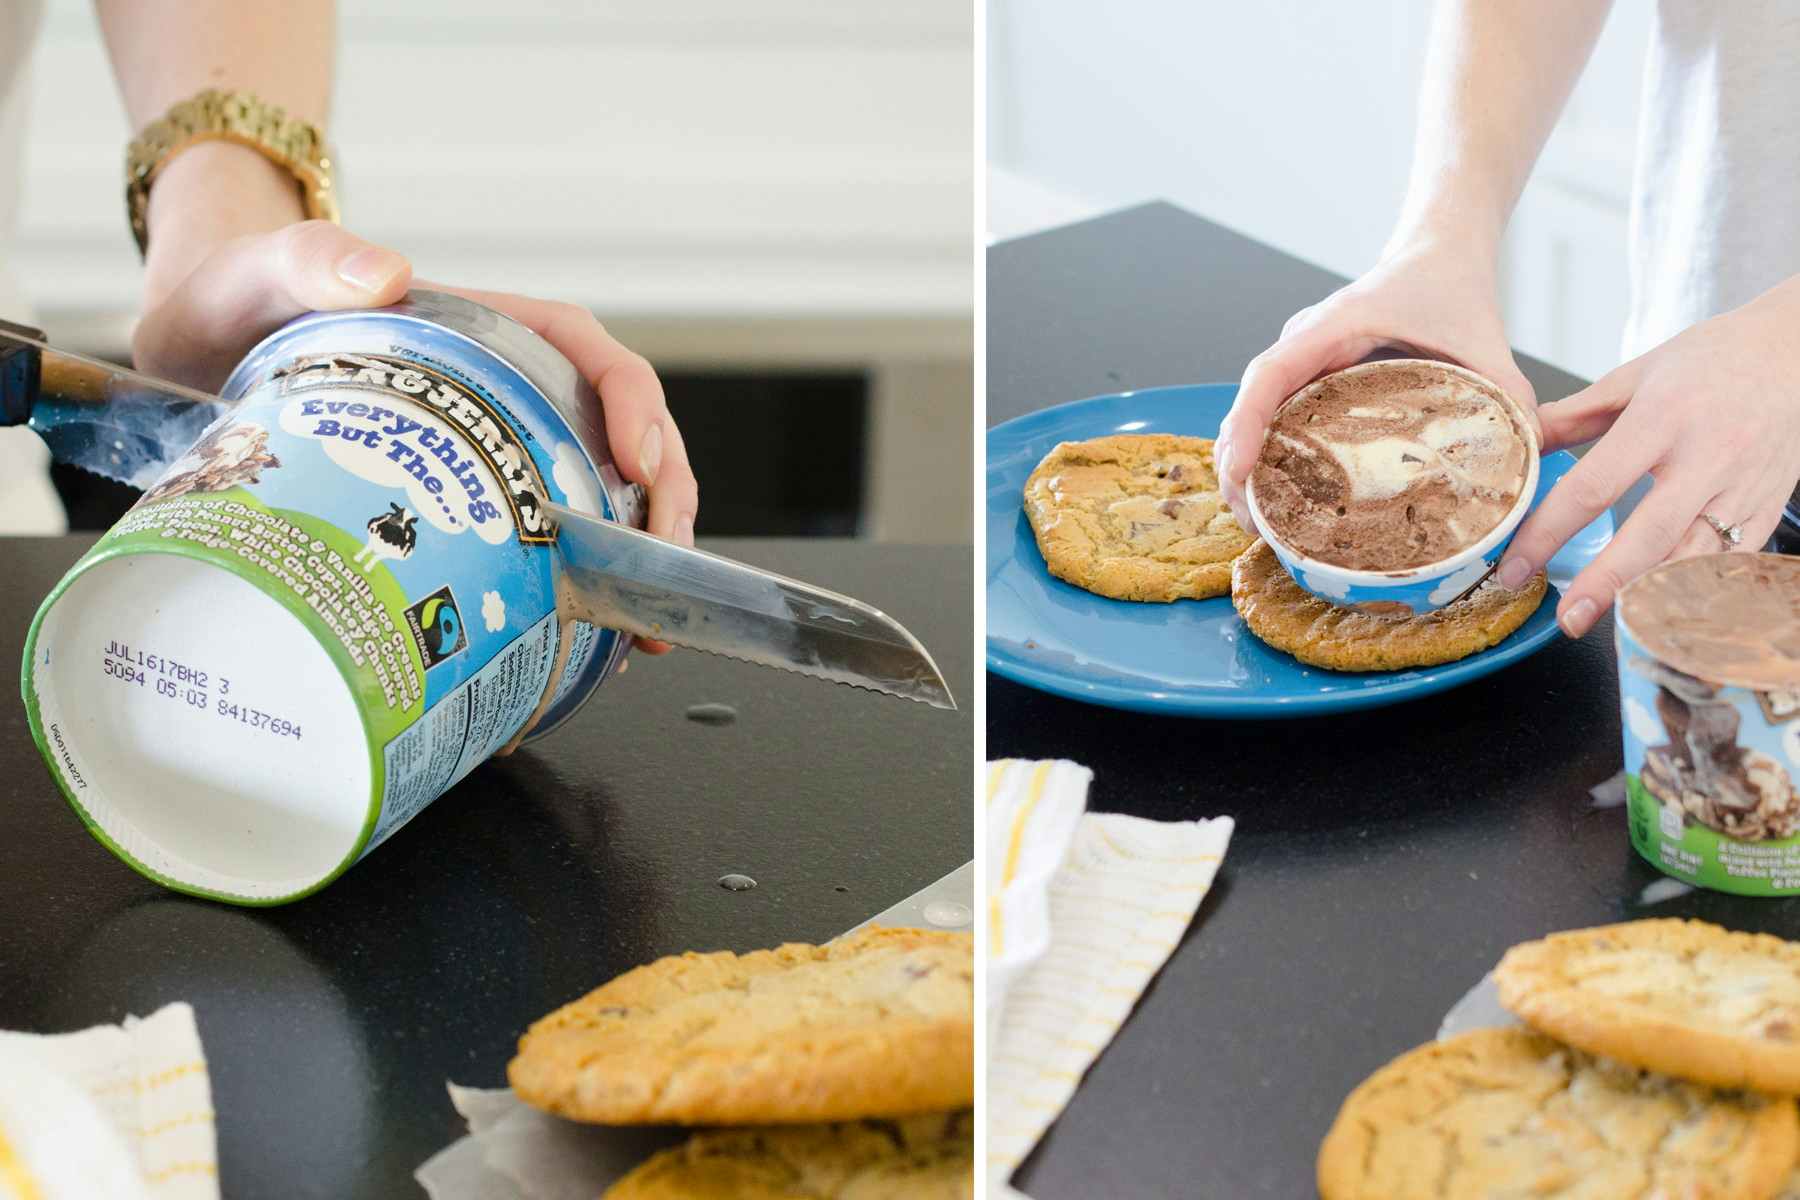 Someone slicing a container of ice cream and placing the slices on cookies.